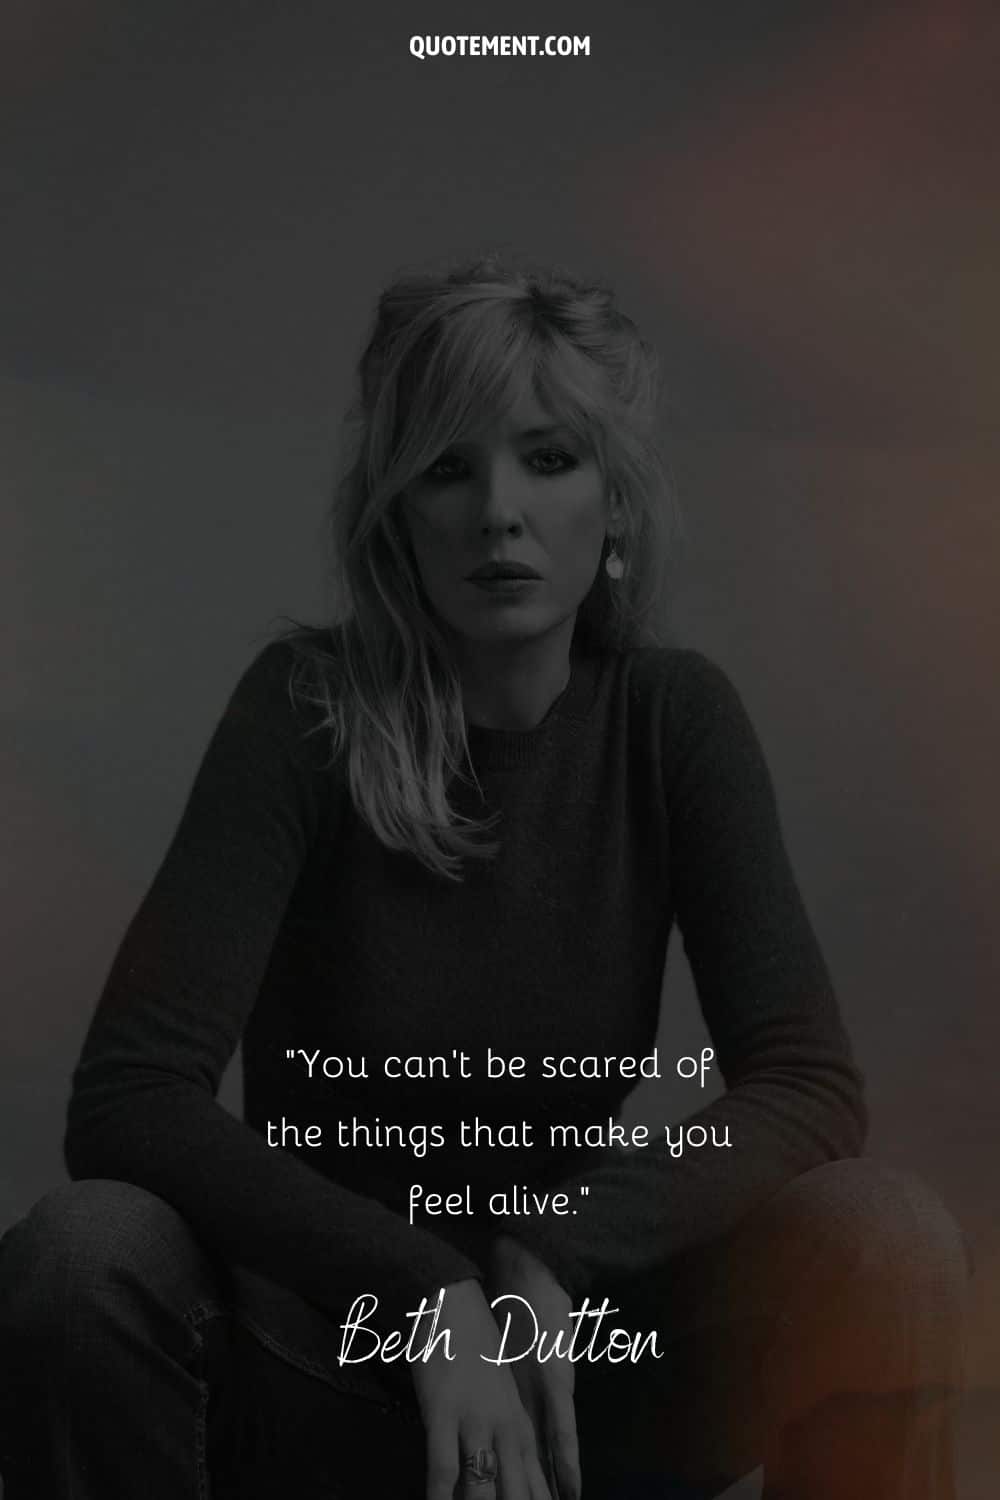 You can't be scared of the things that make you feel alive